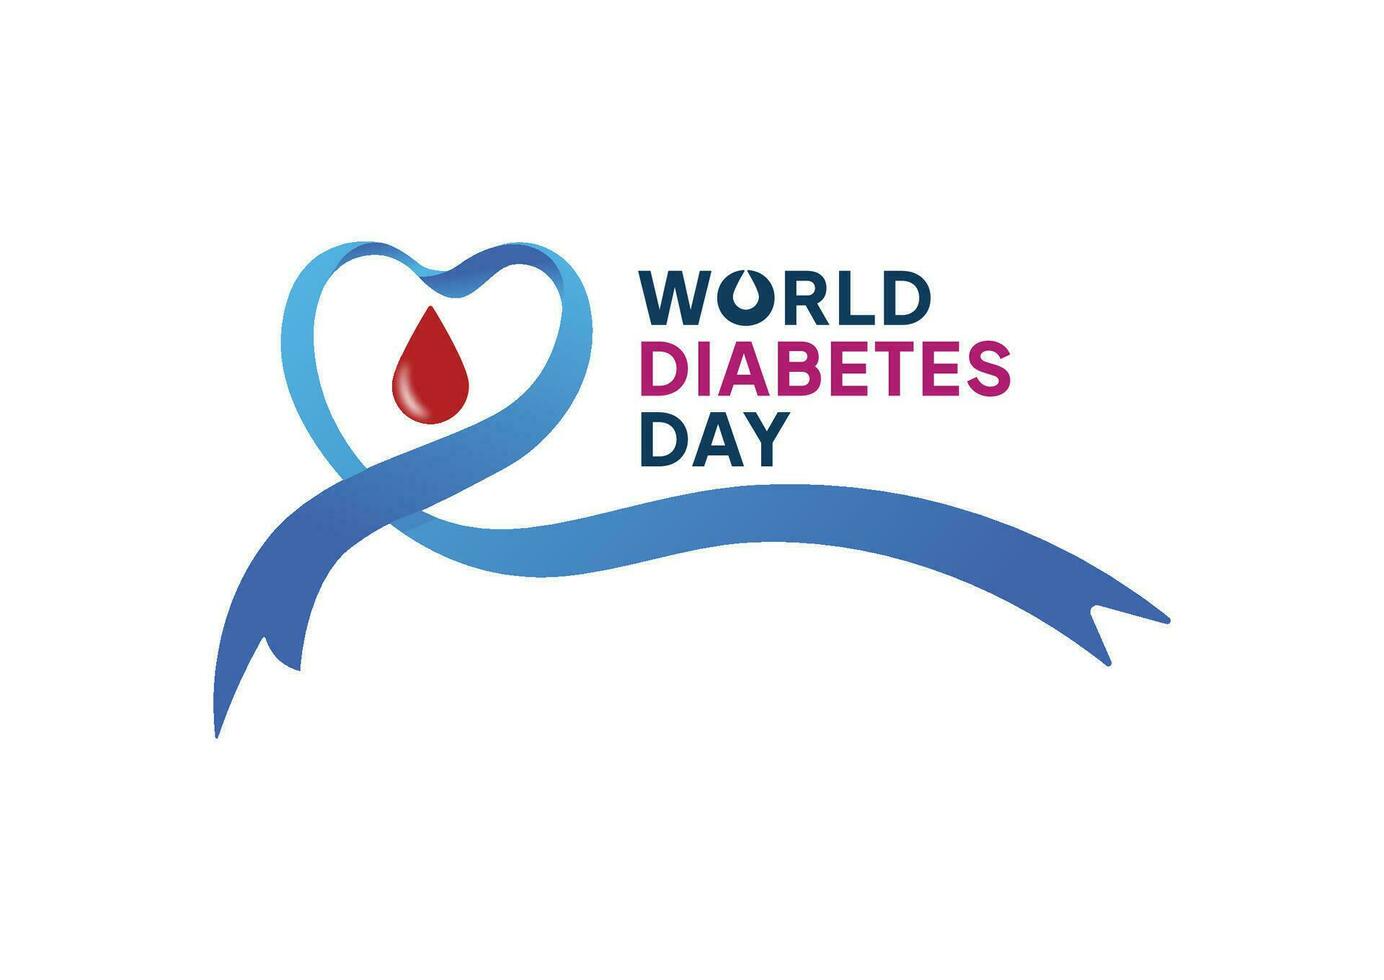 World diabetes day vector concept background illustration with heart shaped ribbon